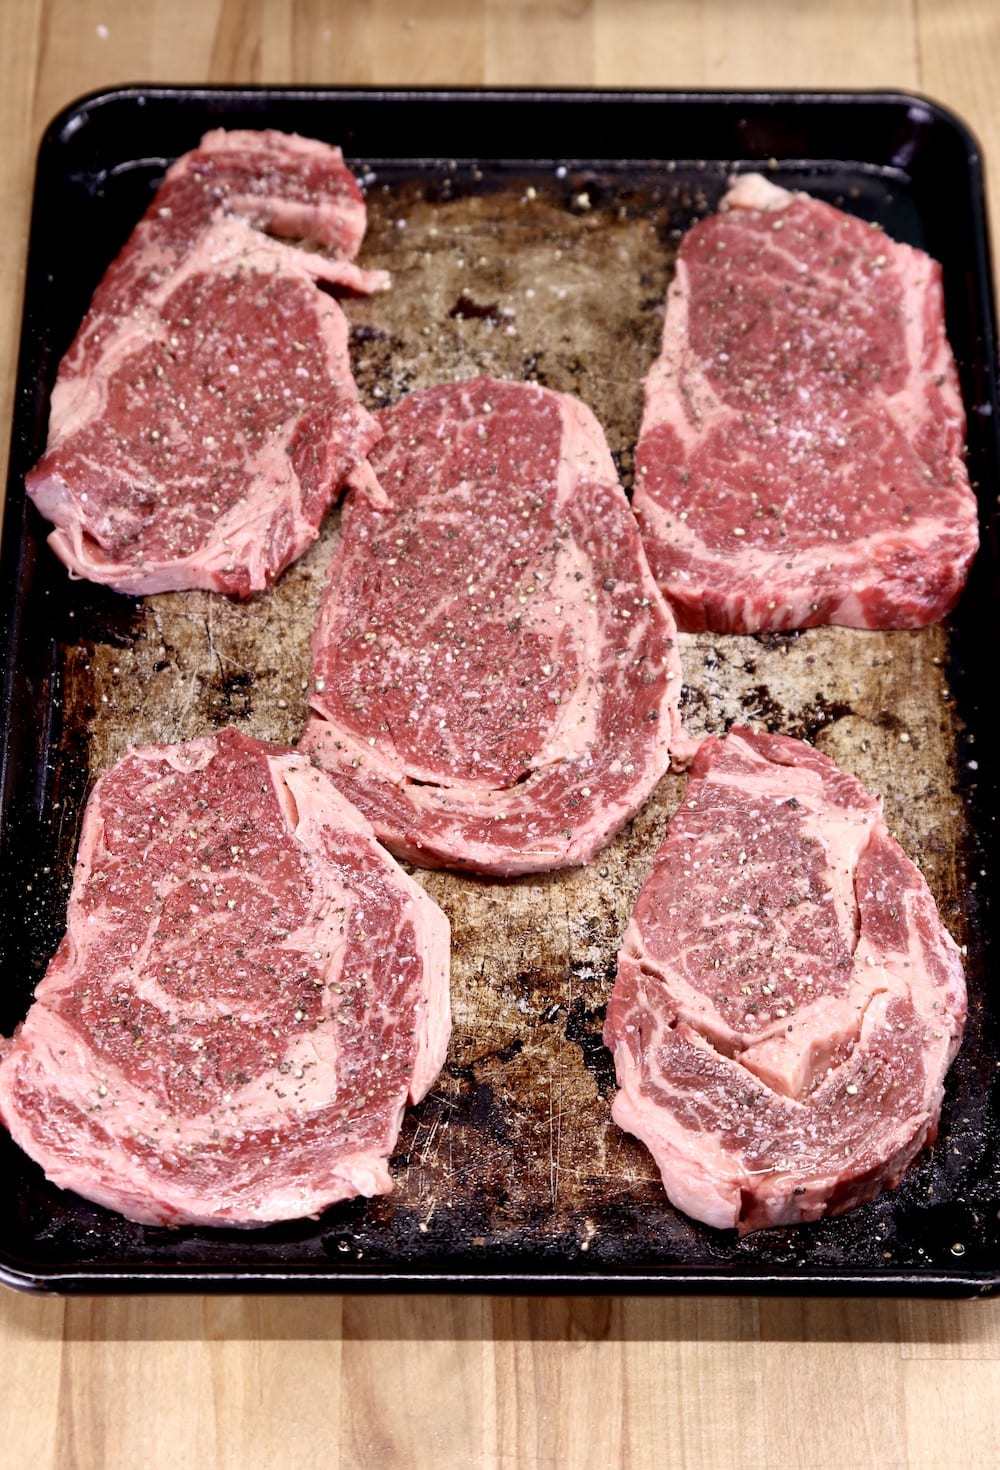 ribeye steaks seasoned with salt and pepper for grilling